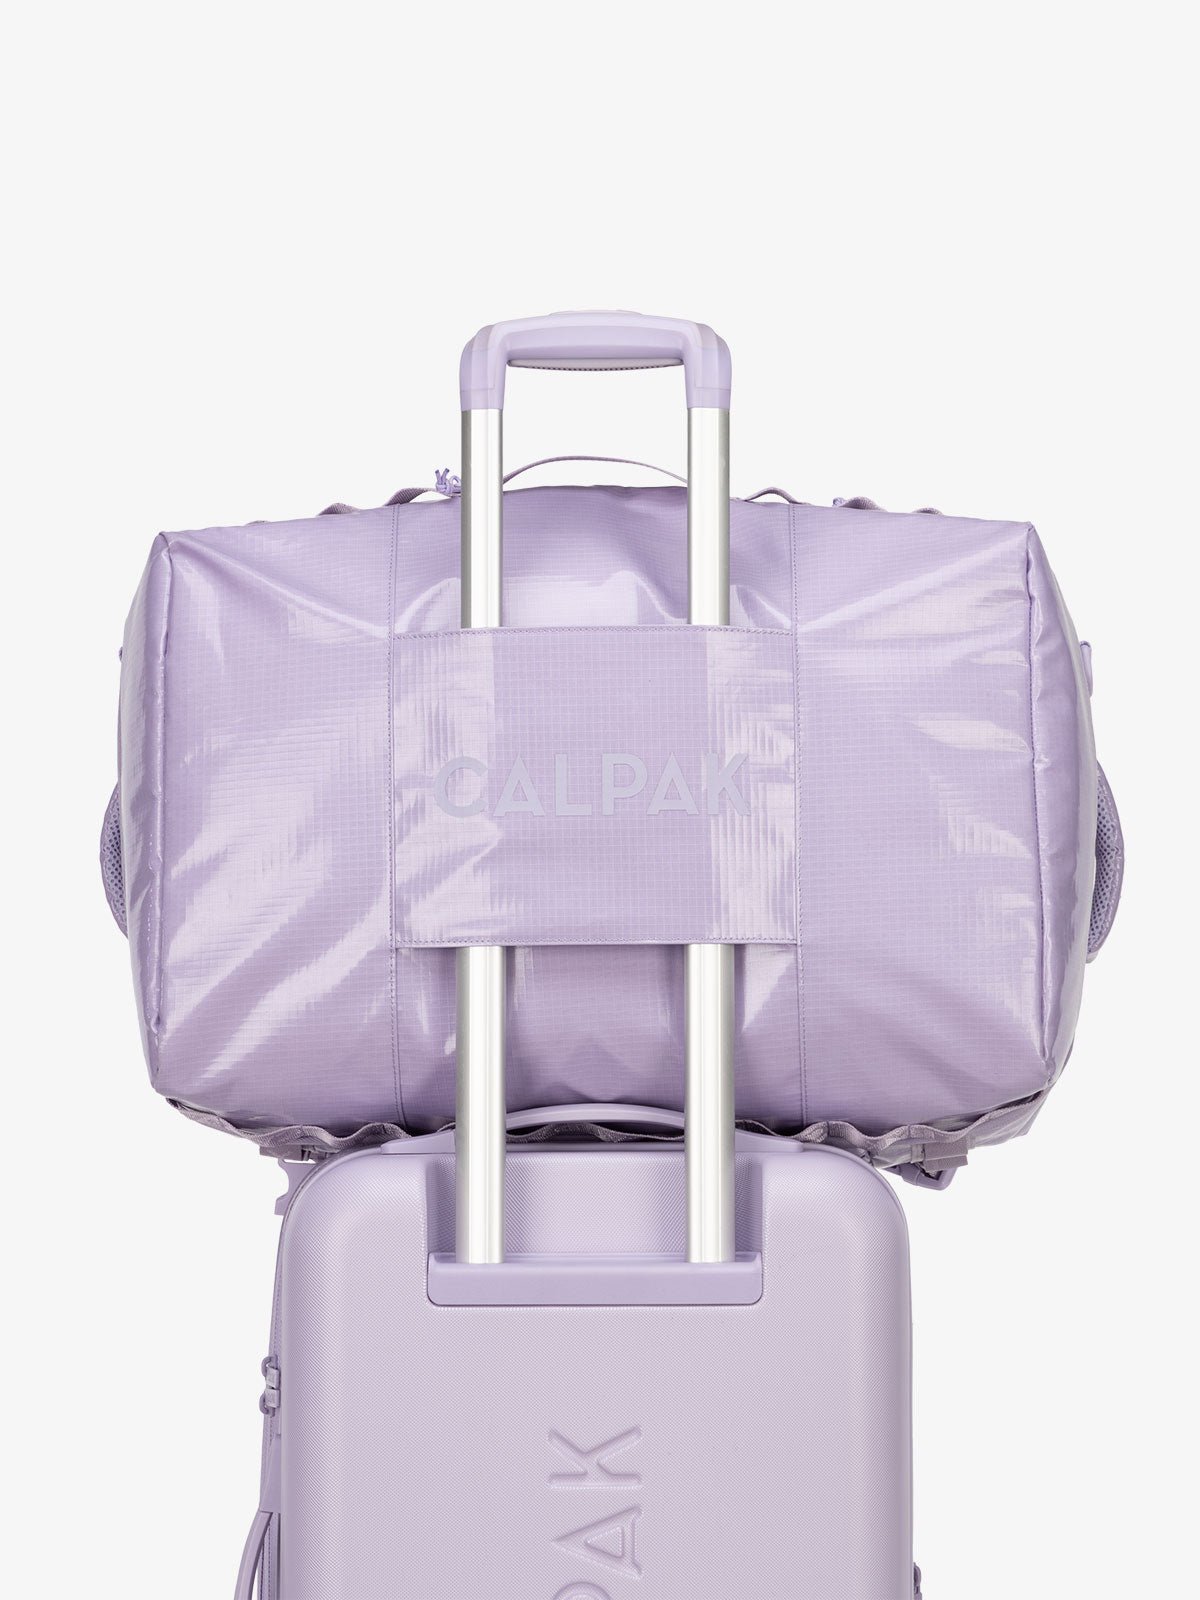 Terra Large 50L Duffel Backpack with trolley passthrough in light purple